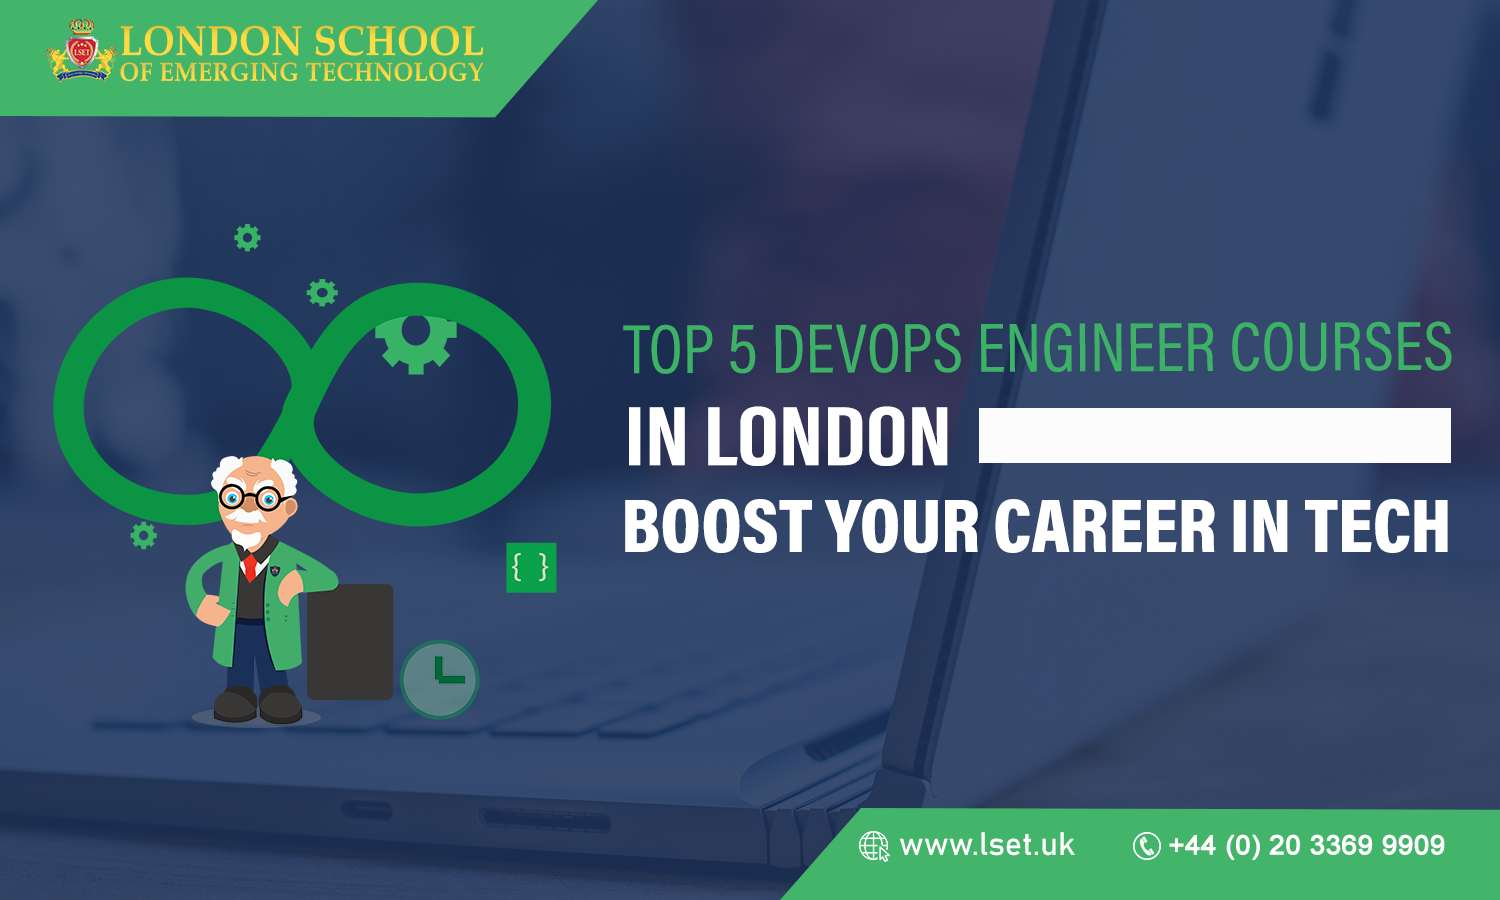 Top 5 DevOps Engineer Courses in London Boost Your Career in Tech 4.48.21 PM